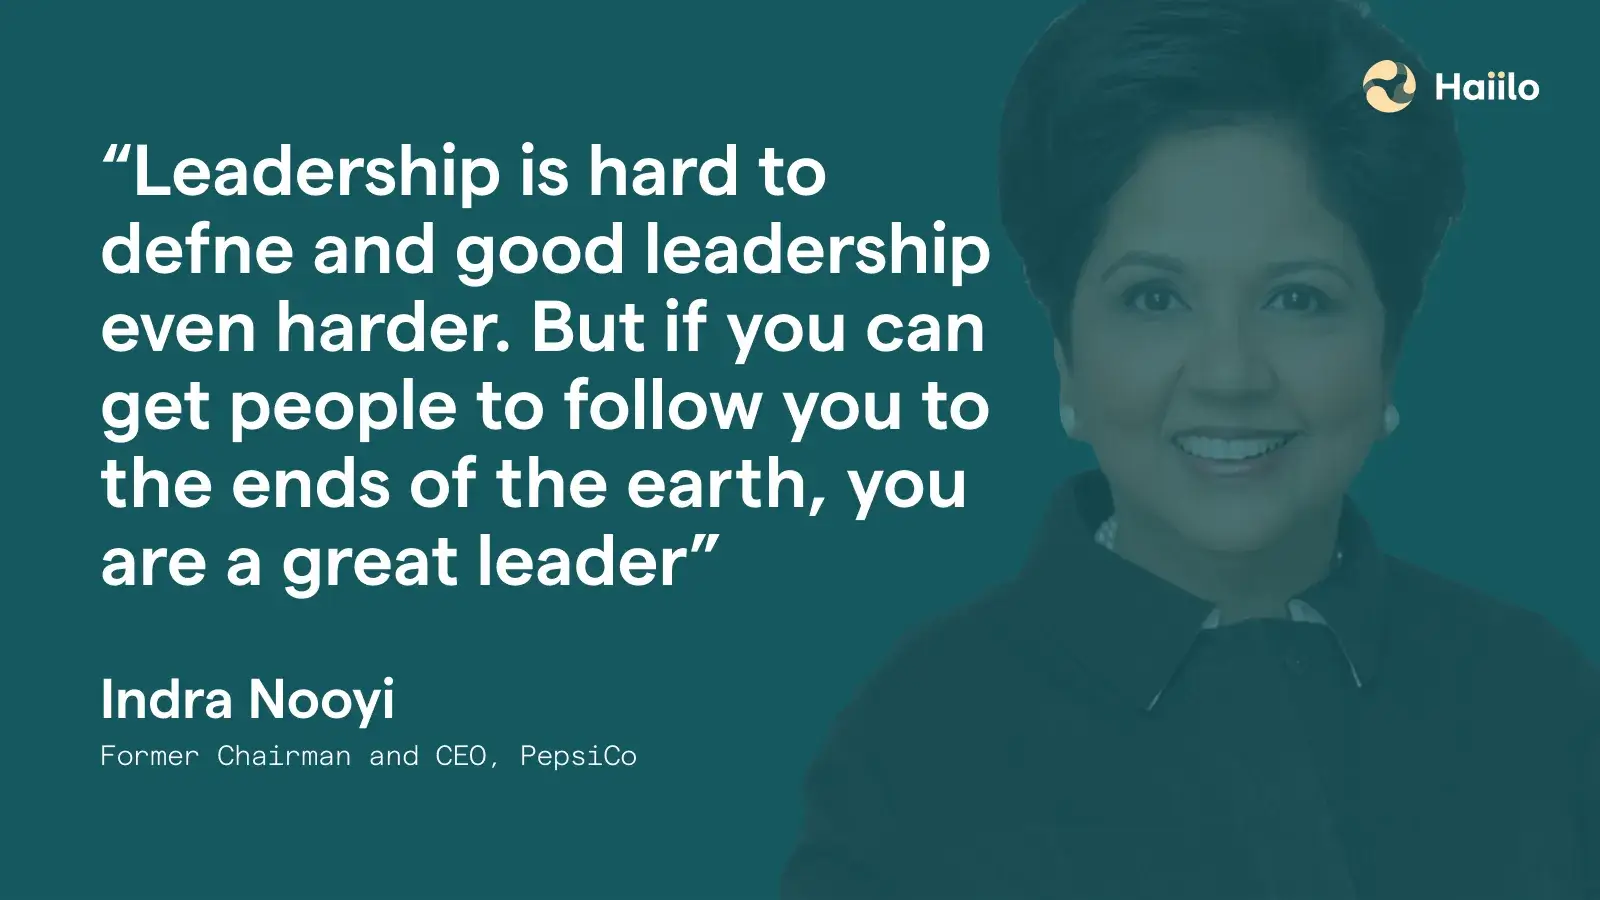 a quote from Indra Nooyi, PepsiCo